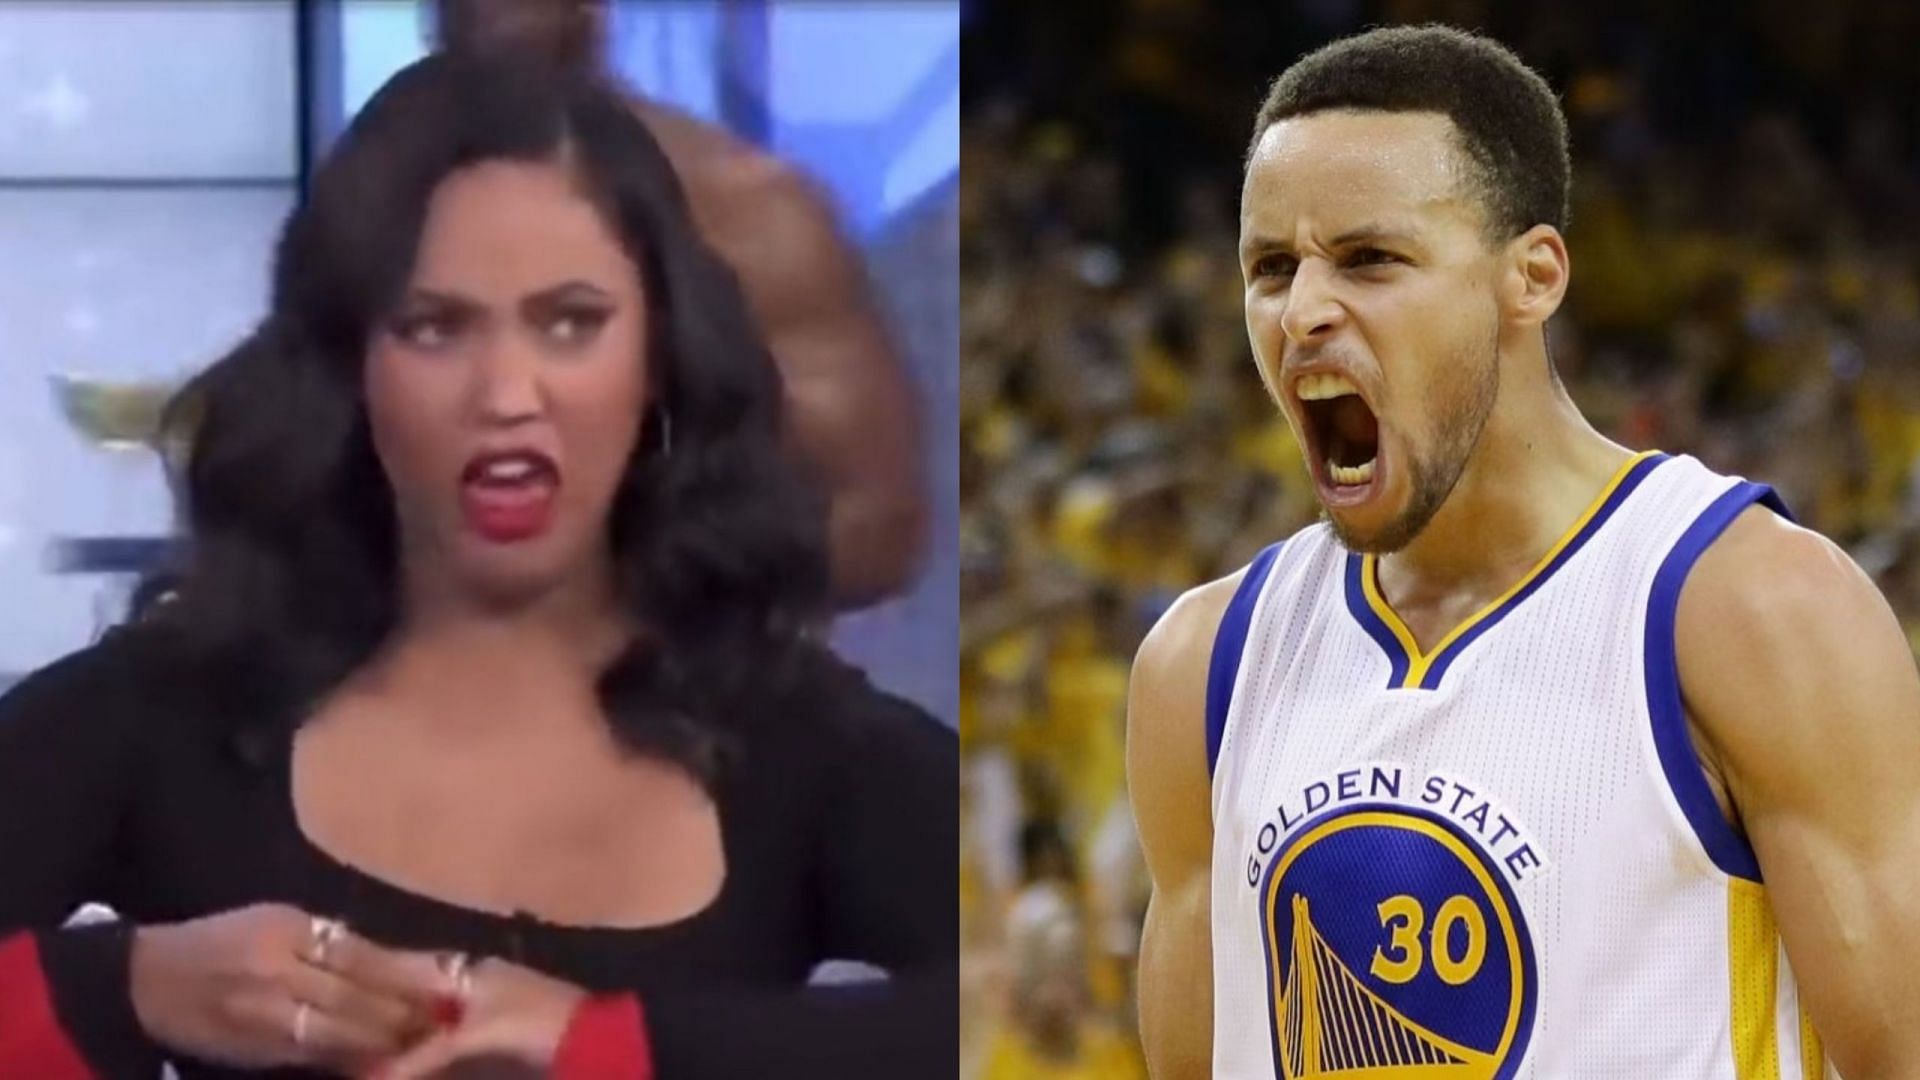 Steph Curry might not be happy with the viral video of his wife Ayesha Curry on Twitter.